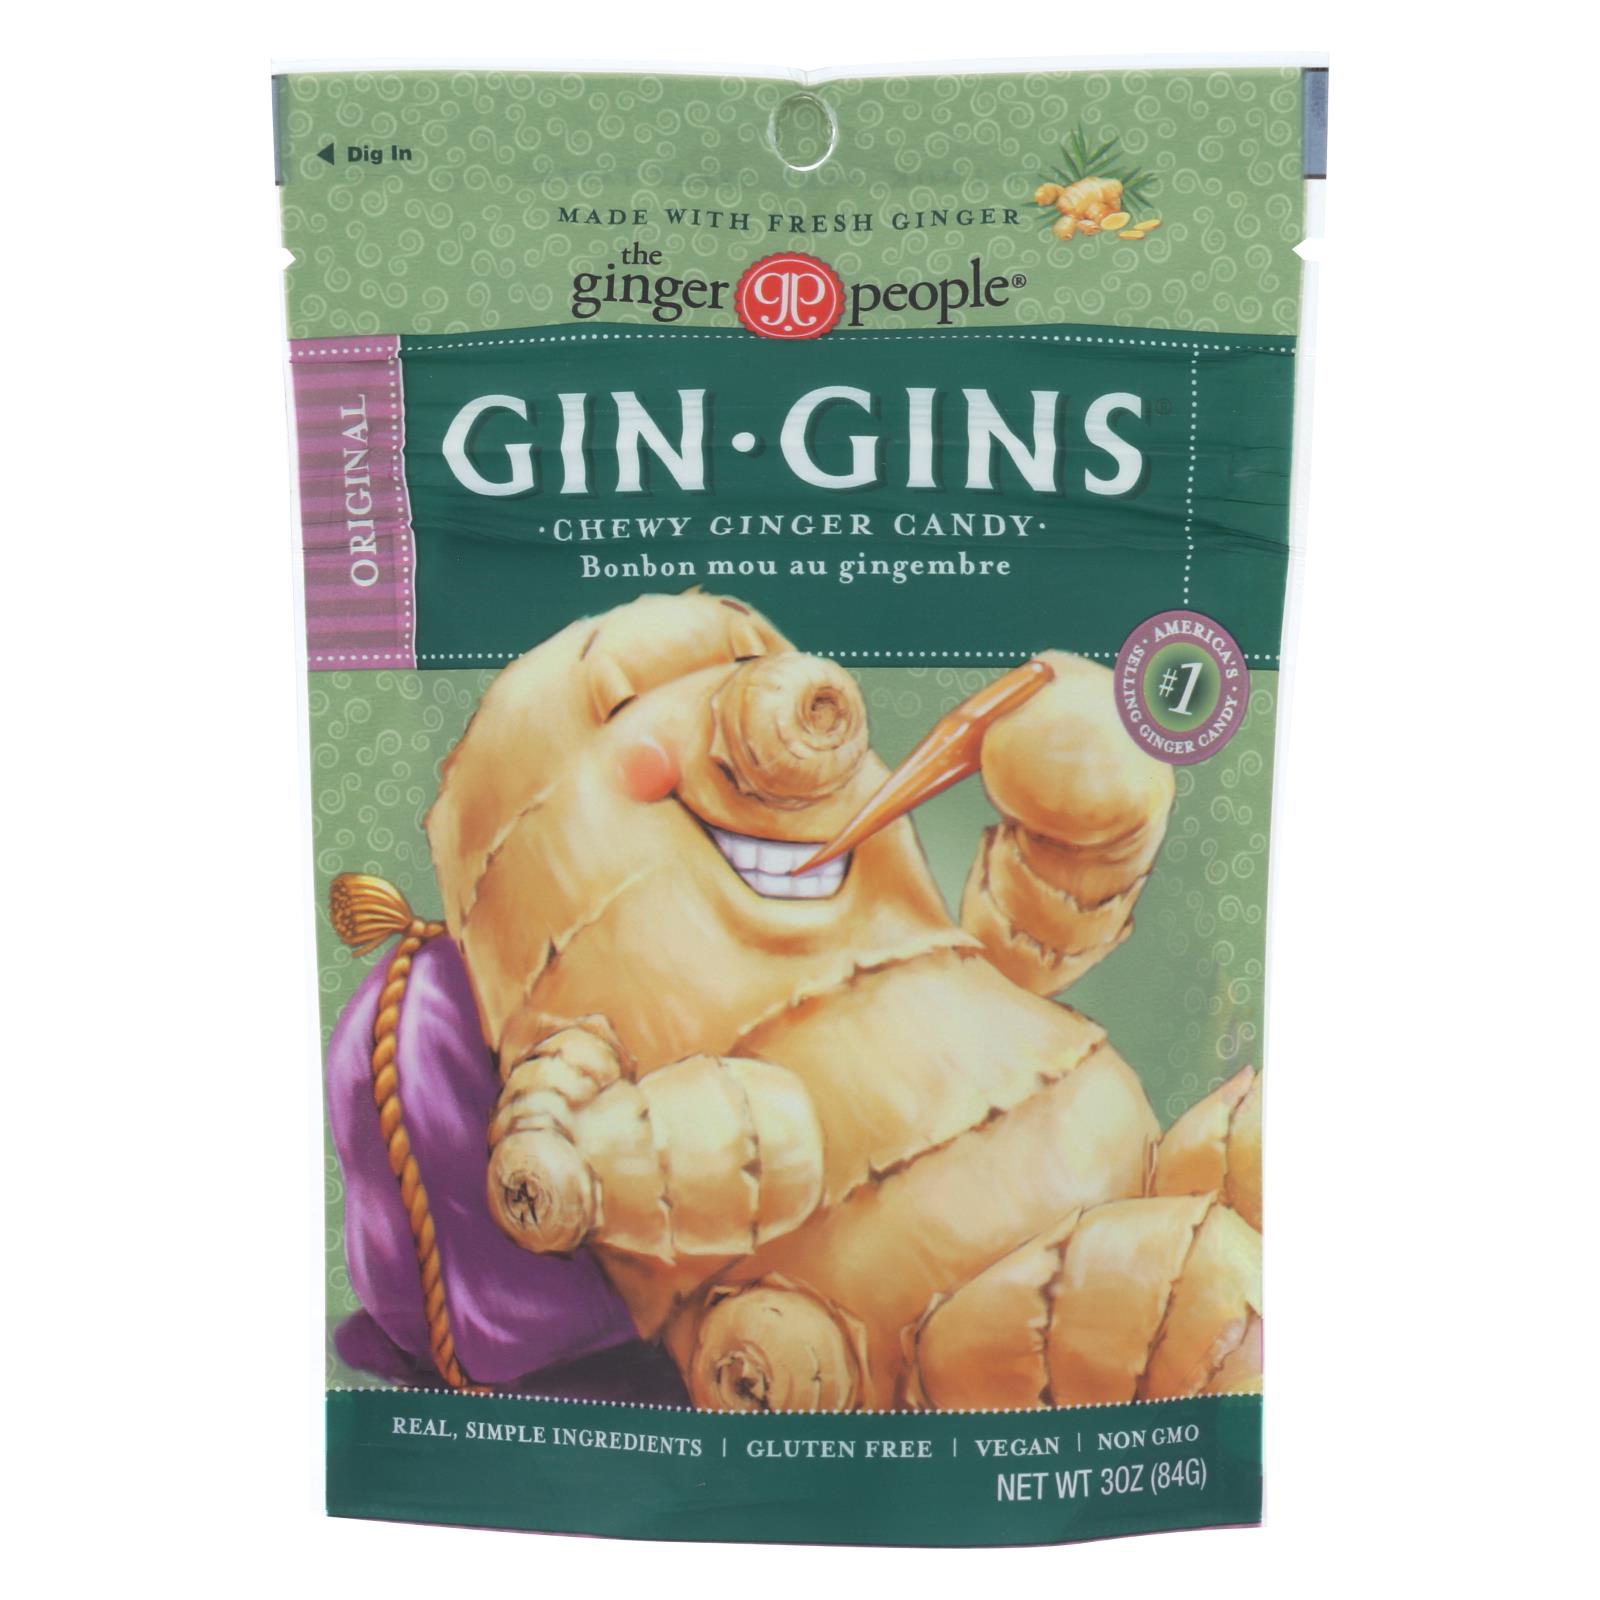 Ginger People - Gin Gins Chewy Ginger Candy - Original - 12개 묶음상품 - 3 oz.